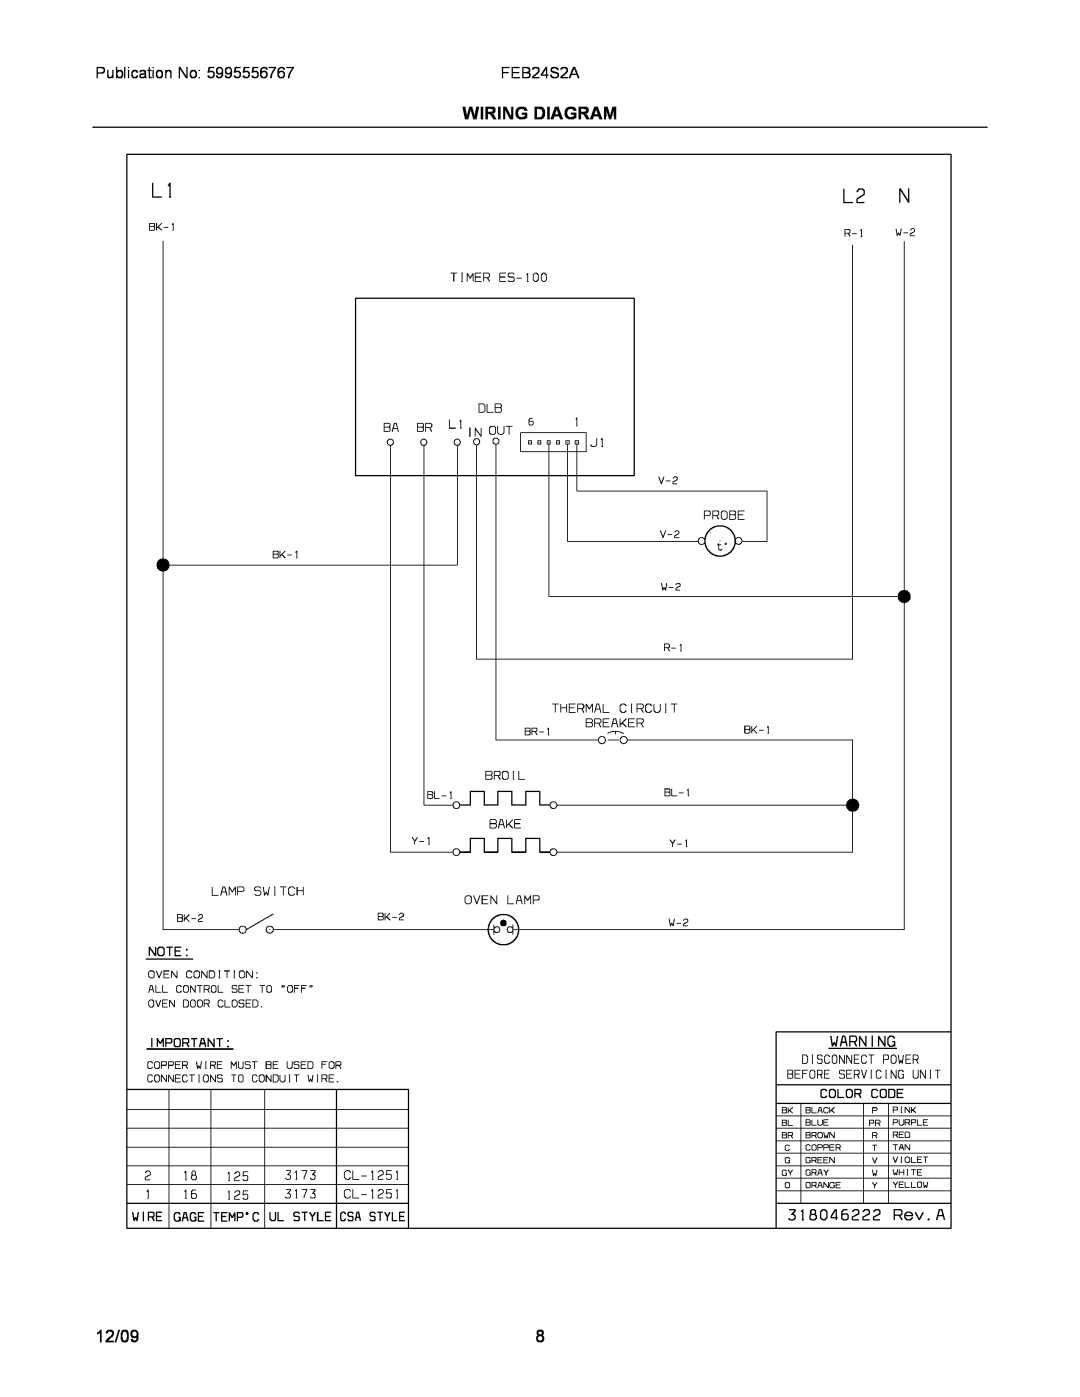 Electrolux FEB24S2A installation instructions Wiring Diagram, 12/09 